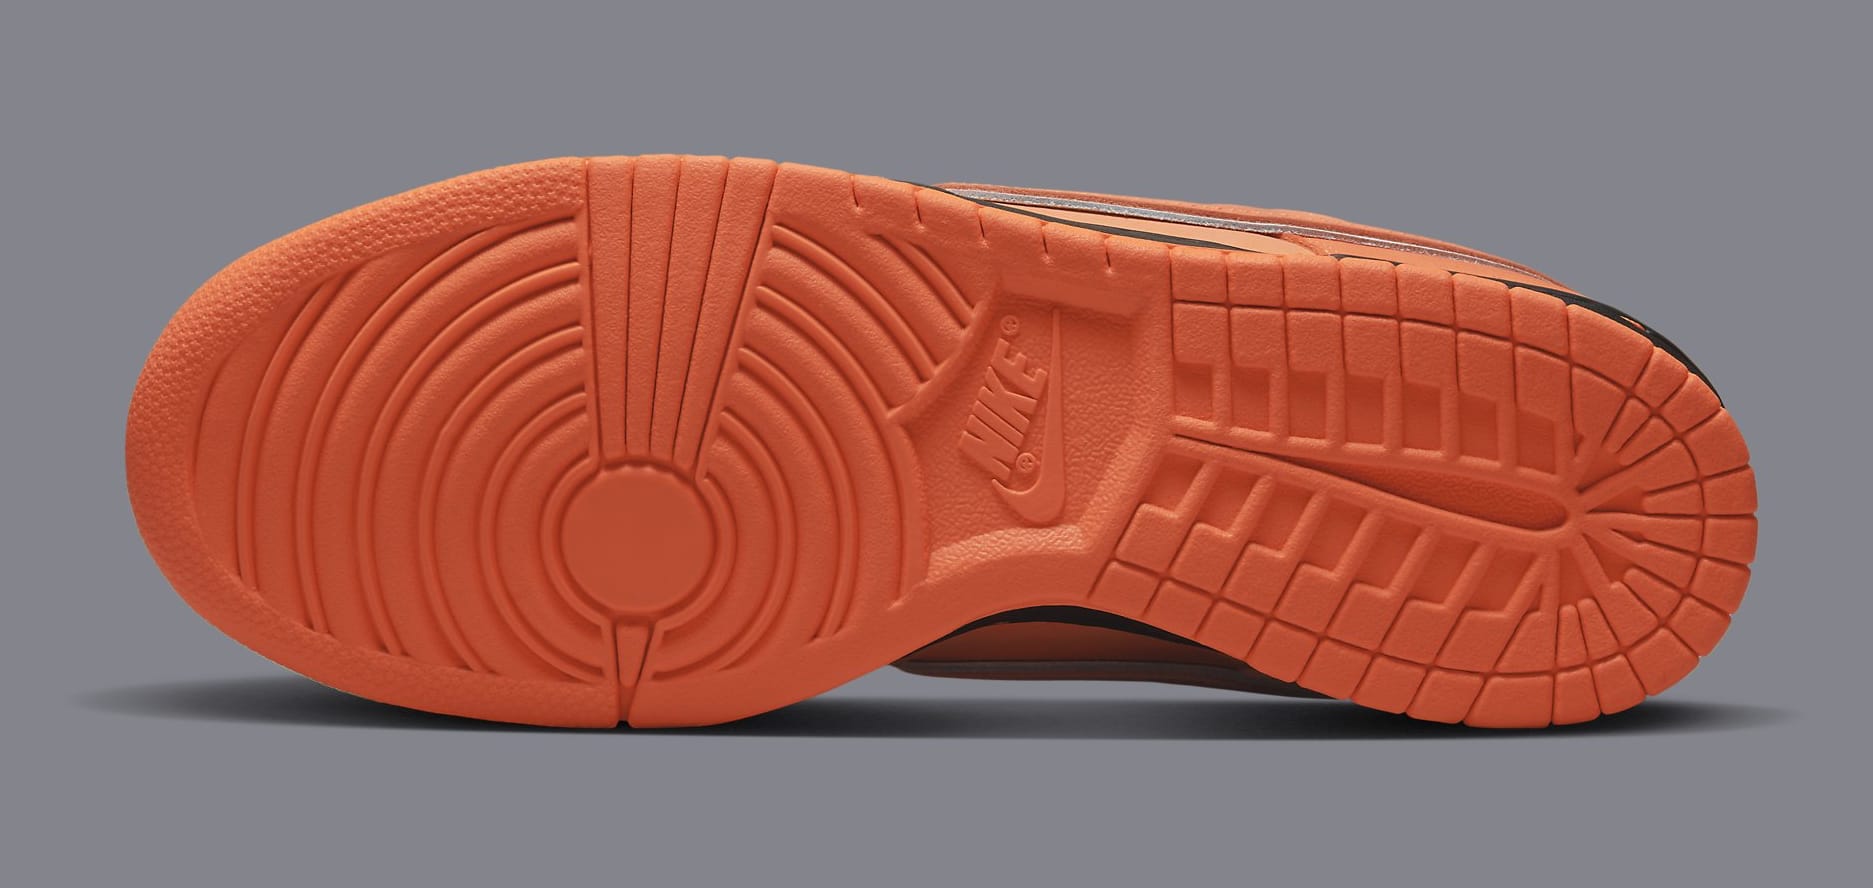 Concepts x Nike SB Dunk Low 'Orange Lobster' FD8776 800 Outsole